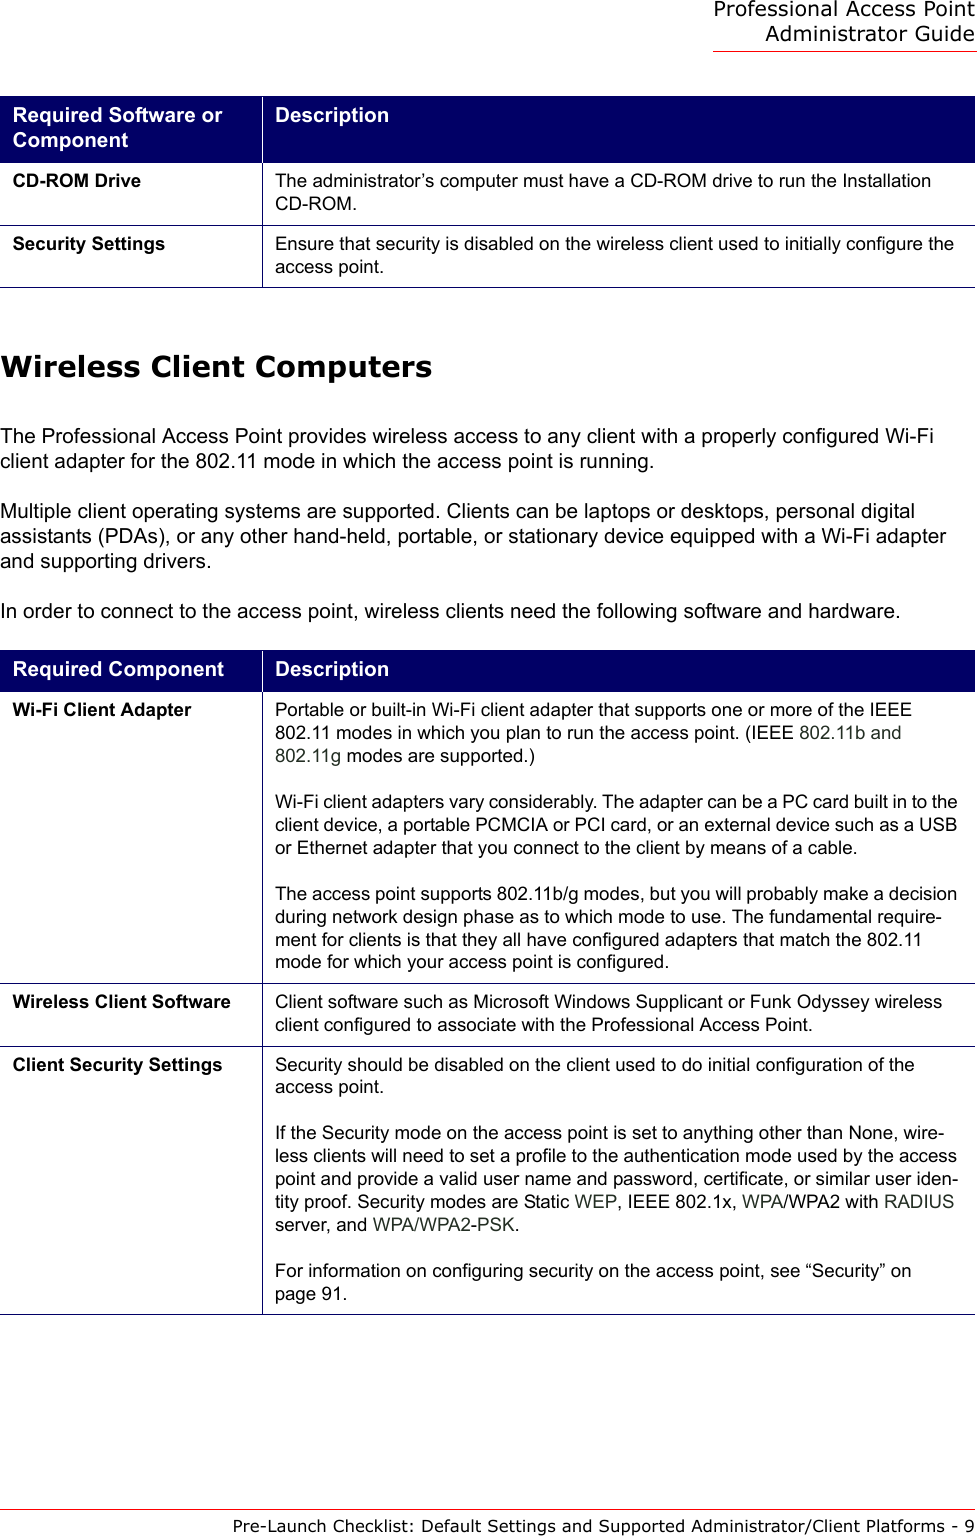 Professional Access Point Administrator GuidePre-Launch Checklist: Default Settings and Supported Administrator/Client Platforms - 9Wireless Client ComputersThe Professional Access Point provides wireless access to any client with a properly configured Wi-Fi client adapter for the 802.11 mode in which the access point is running.Multiple client operating systems are supported. Clients can be laptops or desktops, personal digital assistants (PDAs), or any other hand-held, portable, or stationary device equipped with a Wi-Fi adapter and supporting drivers.In order to connect to the access point, wireless clients need the following software and hardware.CD-ROM Drive The administrator’s computer must have a CD-ROM drive to run the Installation CD-ROM.Security Settings Ensure that security is disabled on the wireless client used to initially configure the access point.Required Component DescriptionWi-Fi Client Adapter Portable or built-in Wi-Fi client adapter that supports one or more of the IEEE 802.11 modes in which you plan to run the access point. (IEEE 802.11b and 802.11g modes are supported.)Wi-Fi client adapters vary considerably. The adapter can be a PC card built in to the client device, a portable PCMCIA or PCI card, or an external device such as a USB or Ethernet adapter that you connect to the client by means of a cable.The access point supports 802.11b/g modes, but you will probably make a decision during network design phase as to which mode to use. The fundamental require-ment for clients is that they all have configured adapters that match the 802.11 mode for which your access point is configured.Wireless Client Software Client software such as Microsoft Windows Supplicant or Funk Odyssey wireless client configured to associate with the Professional Access Point.Client Security Settings Security should be disabled on the client used to do initial configuration of the access point.If the Security mode on the access point is set to anything other than None, wire-less clients will need to set a profile to the authentication mode used by the access point and provide a valid user name and password, certificate, or similar user iden-tity proof. Security modes are Static WEP, IEEE 802.1x, WPA/WPA2 with RADIUS server, and WPA/WPA2-PSK.For information on configuring security on the access point, see “Security” on page 91.Required Software or ComponentDescription